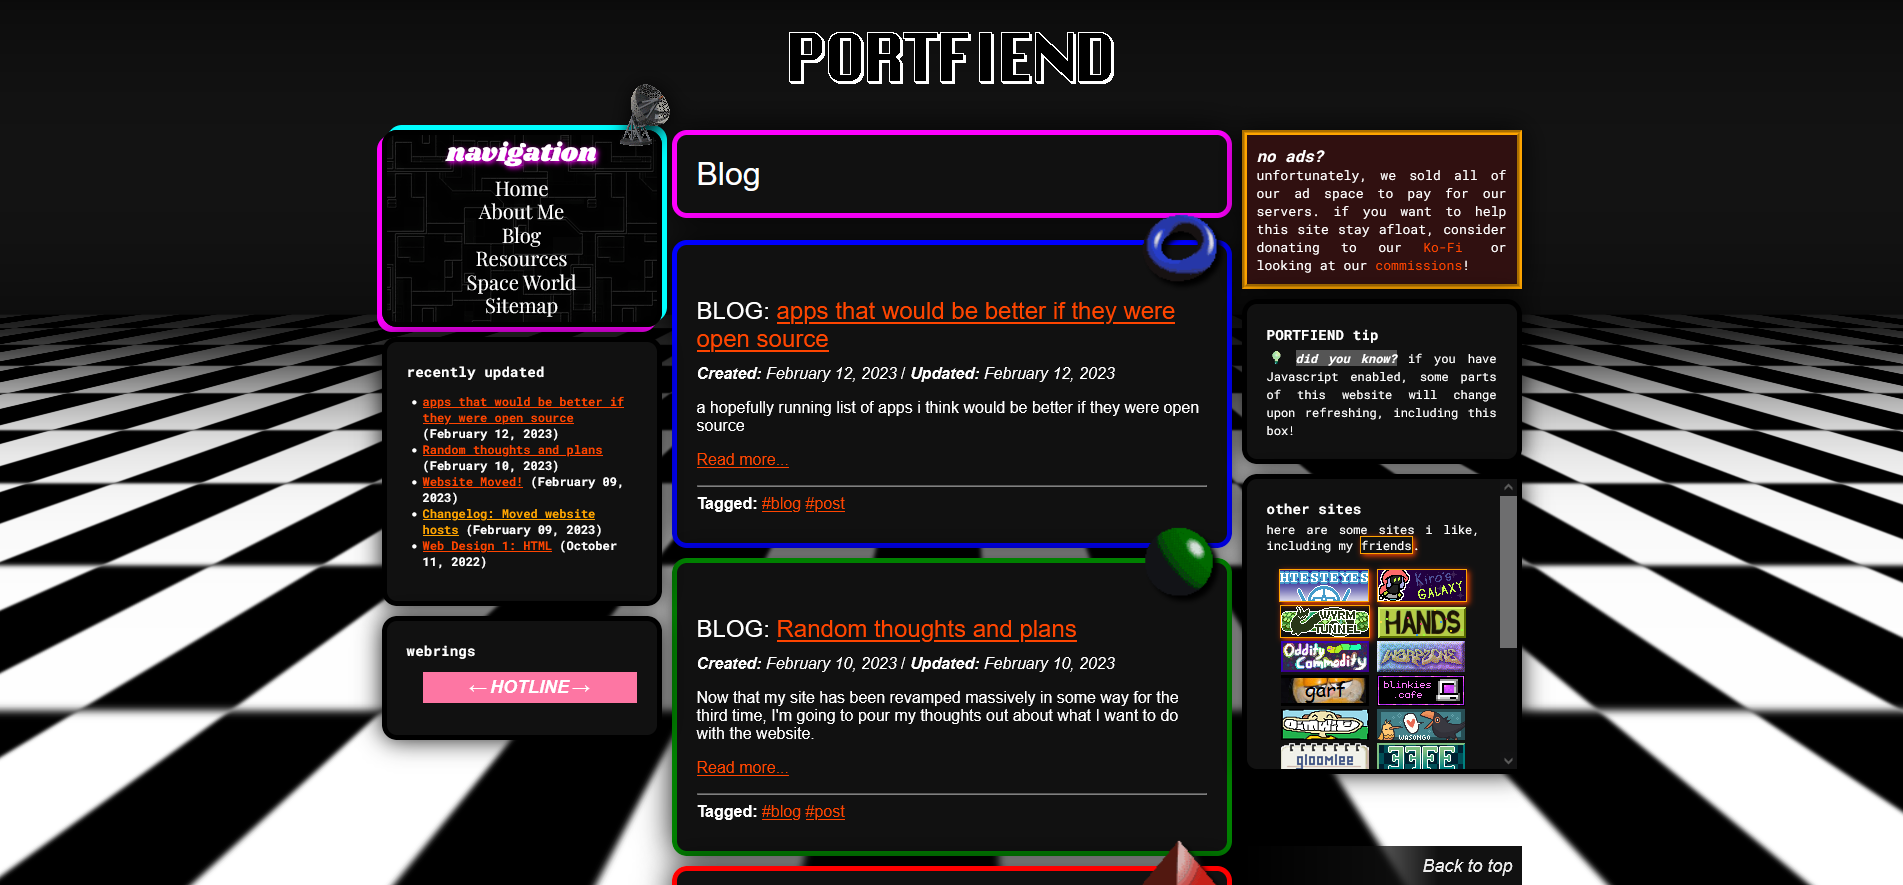 A screenshot of PORTFIEND's scrapped "90s" theme. There are multiple containers in the sidebars, each hosting different content such as navigation, website buttons, webrings, fun facts, and a "recently updated pages" section. The blog directory shows short previews of each blog post in recently-created order. The background of the site consists of a 3D checkerboard floor fading off into the horizon. Gifs and bright-colored borders decorate the main content and sidebar content containers.